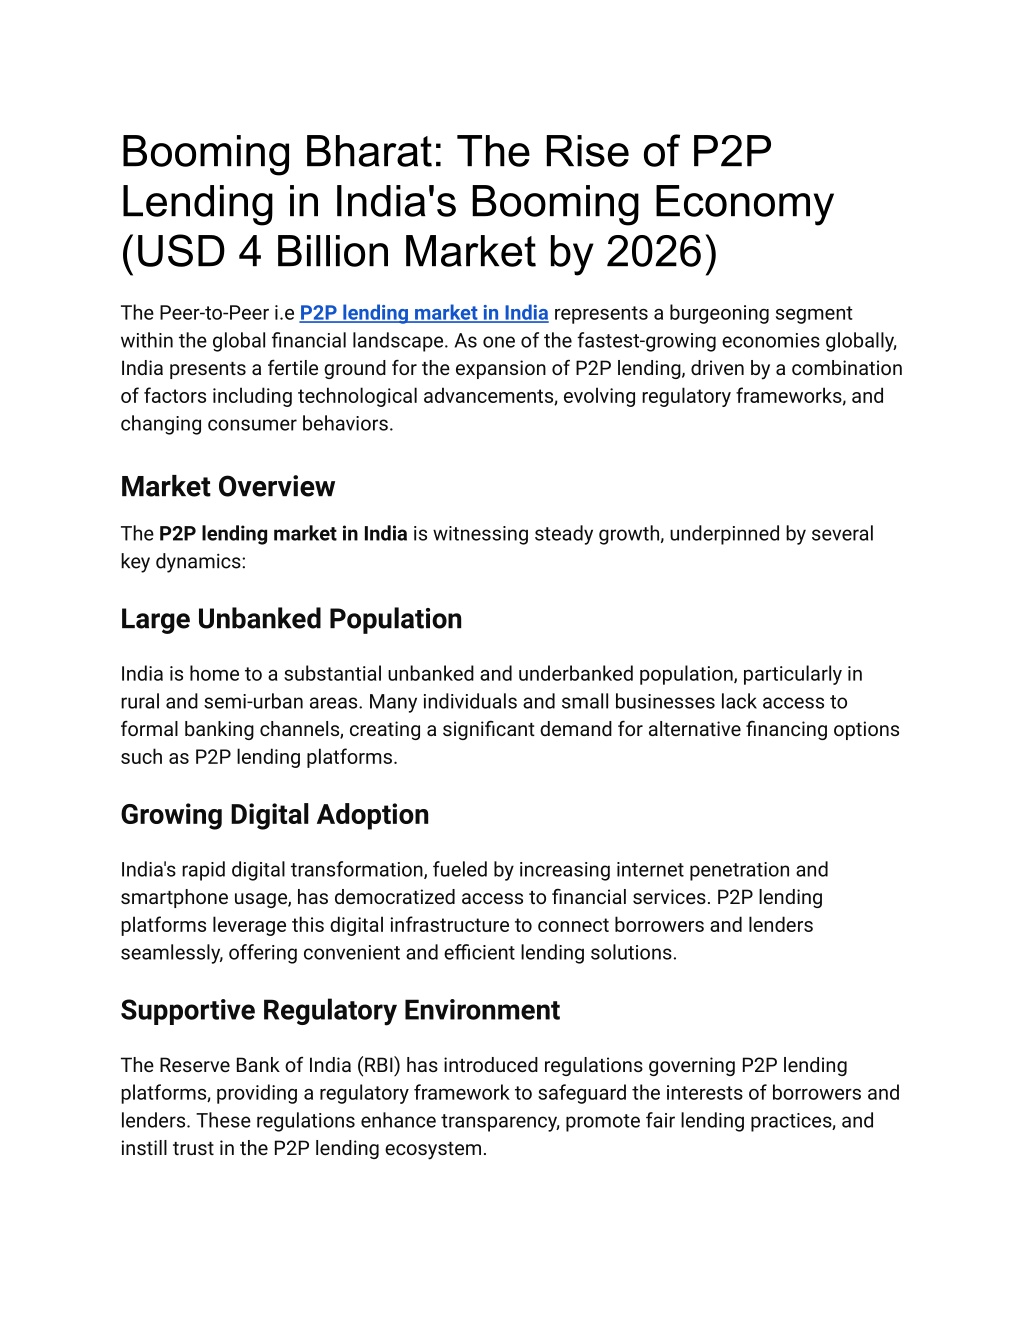 booming bharat the rise of p2p lending in india l.w